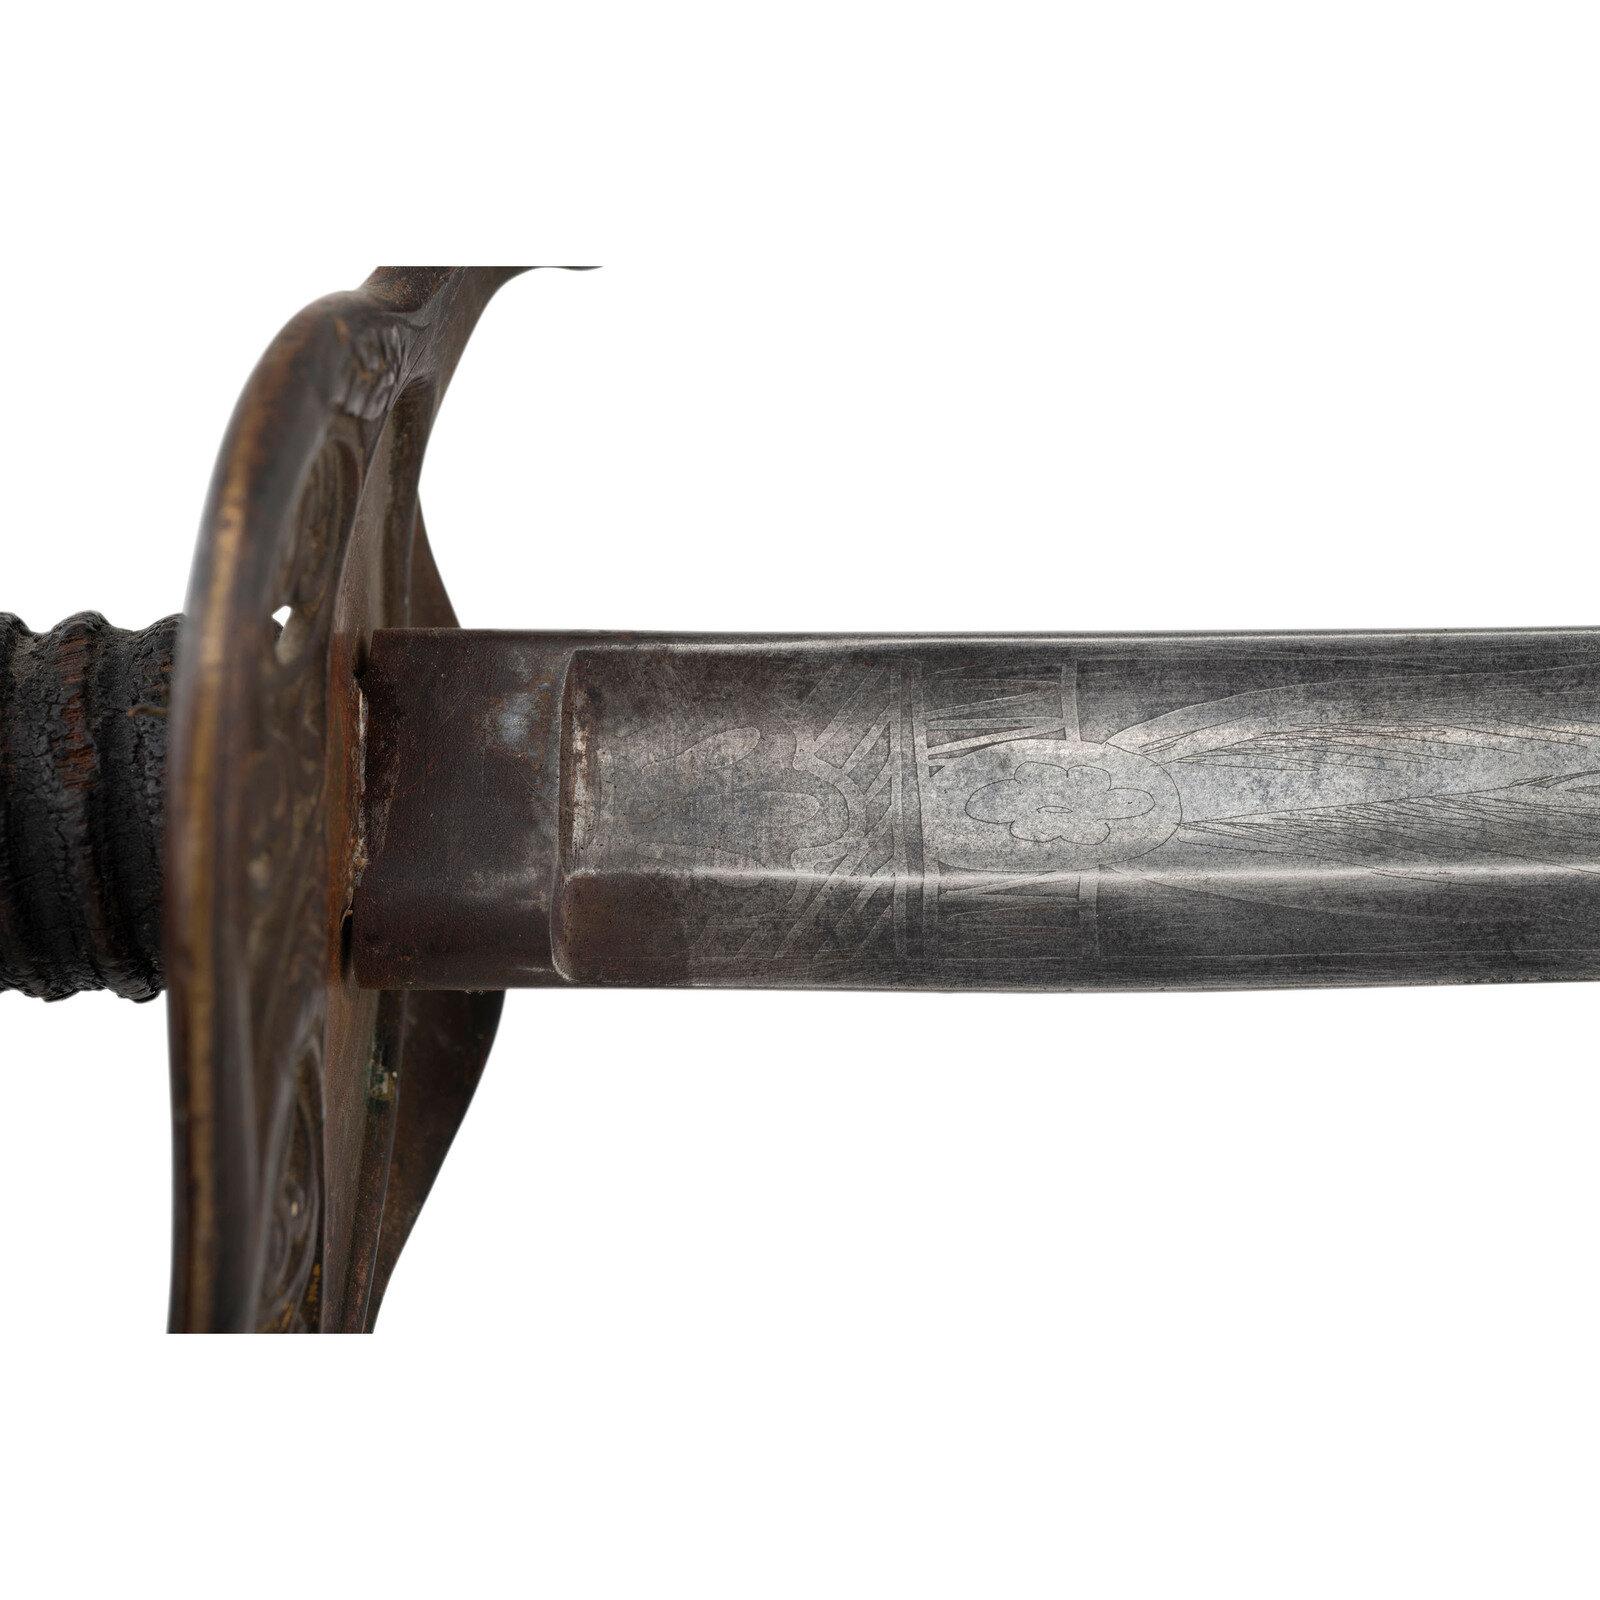 Imported Model 1850 Foot Officer's Sword of Lt. William Tompkins - 115th NY - KIA at Olustee